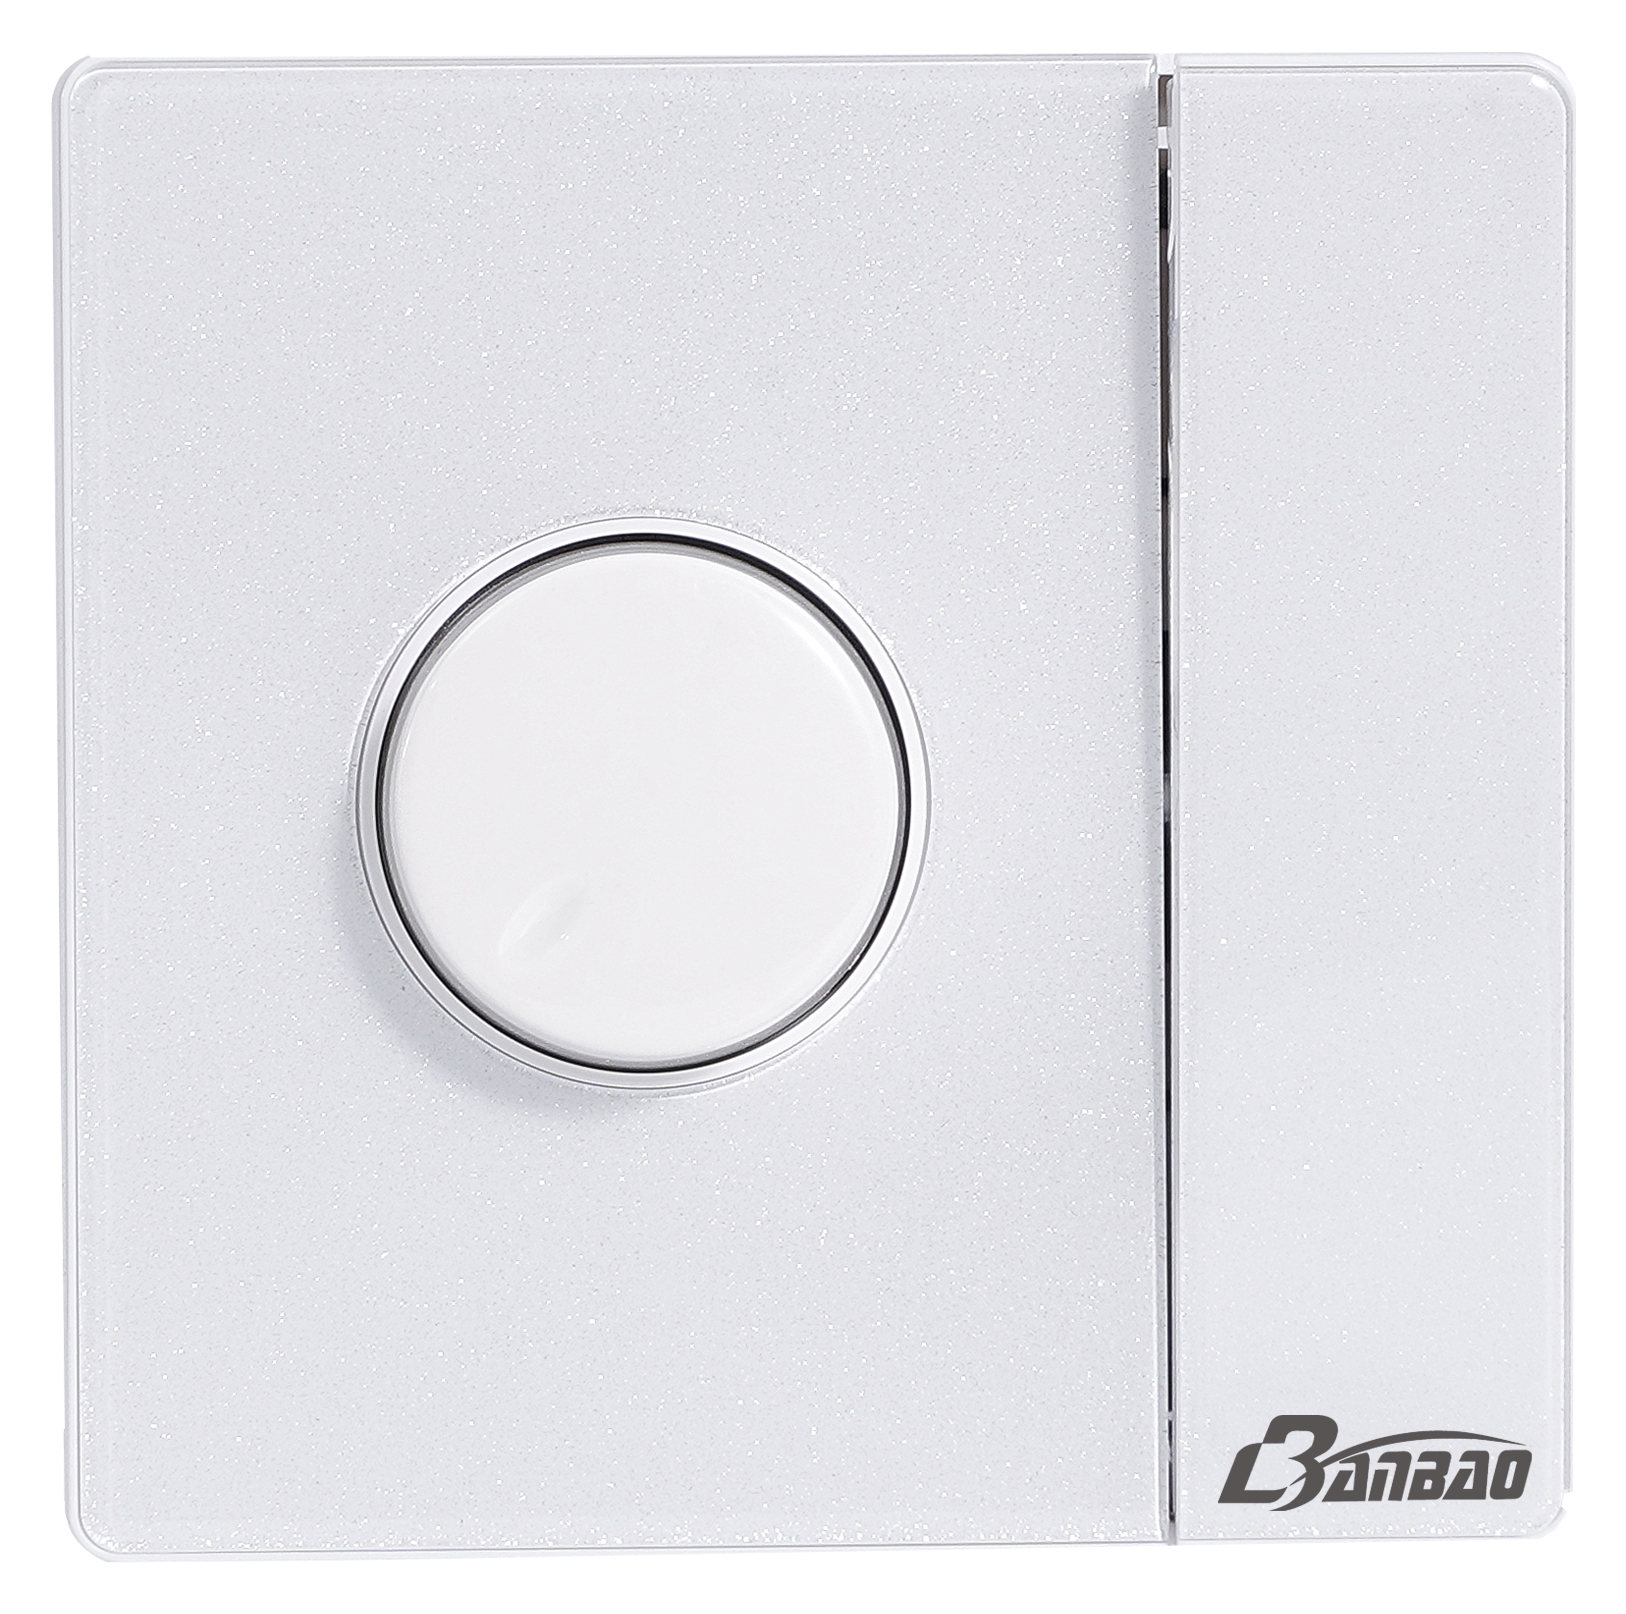 1gang fan dimmer Wall Switch with Glass panel